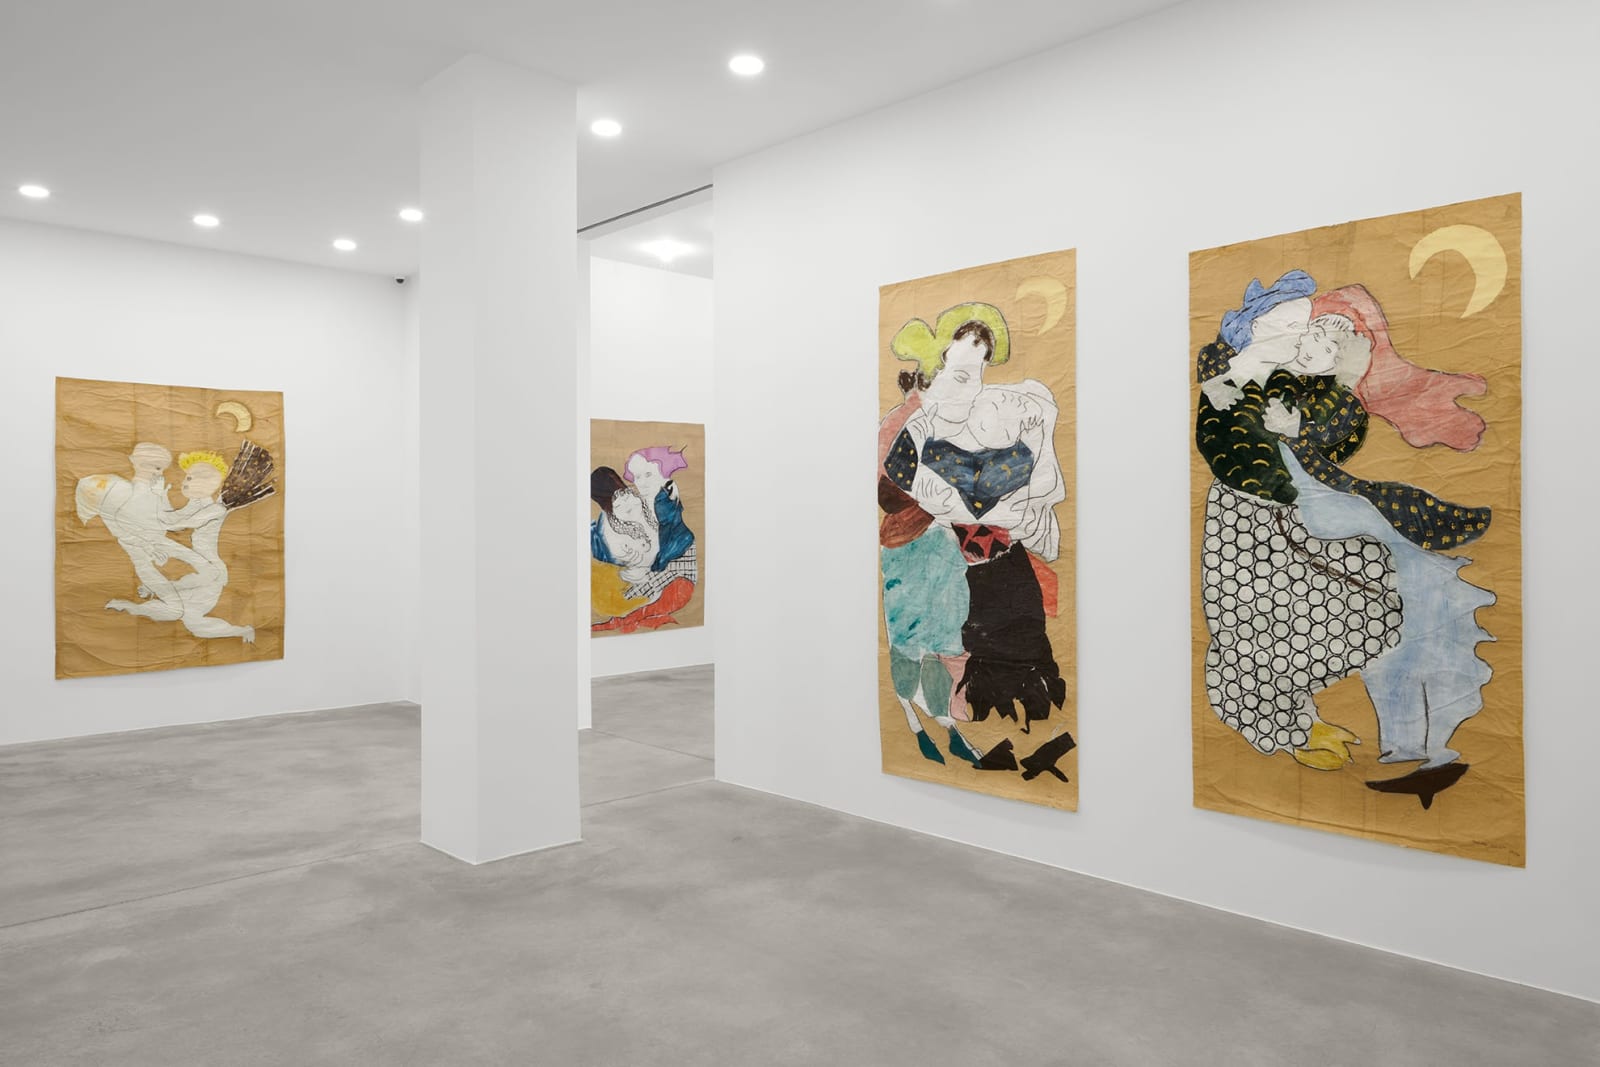 Isabella Ducrot, Tendernesses, 2021 Galerie Gisela Capitain, Cologne